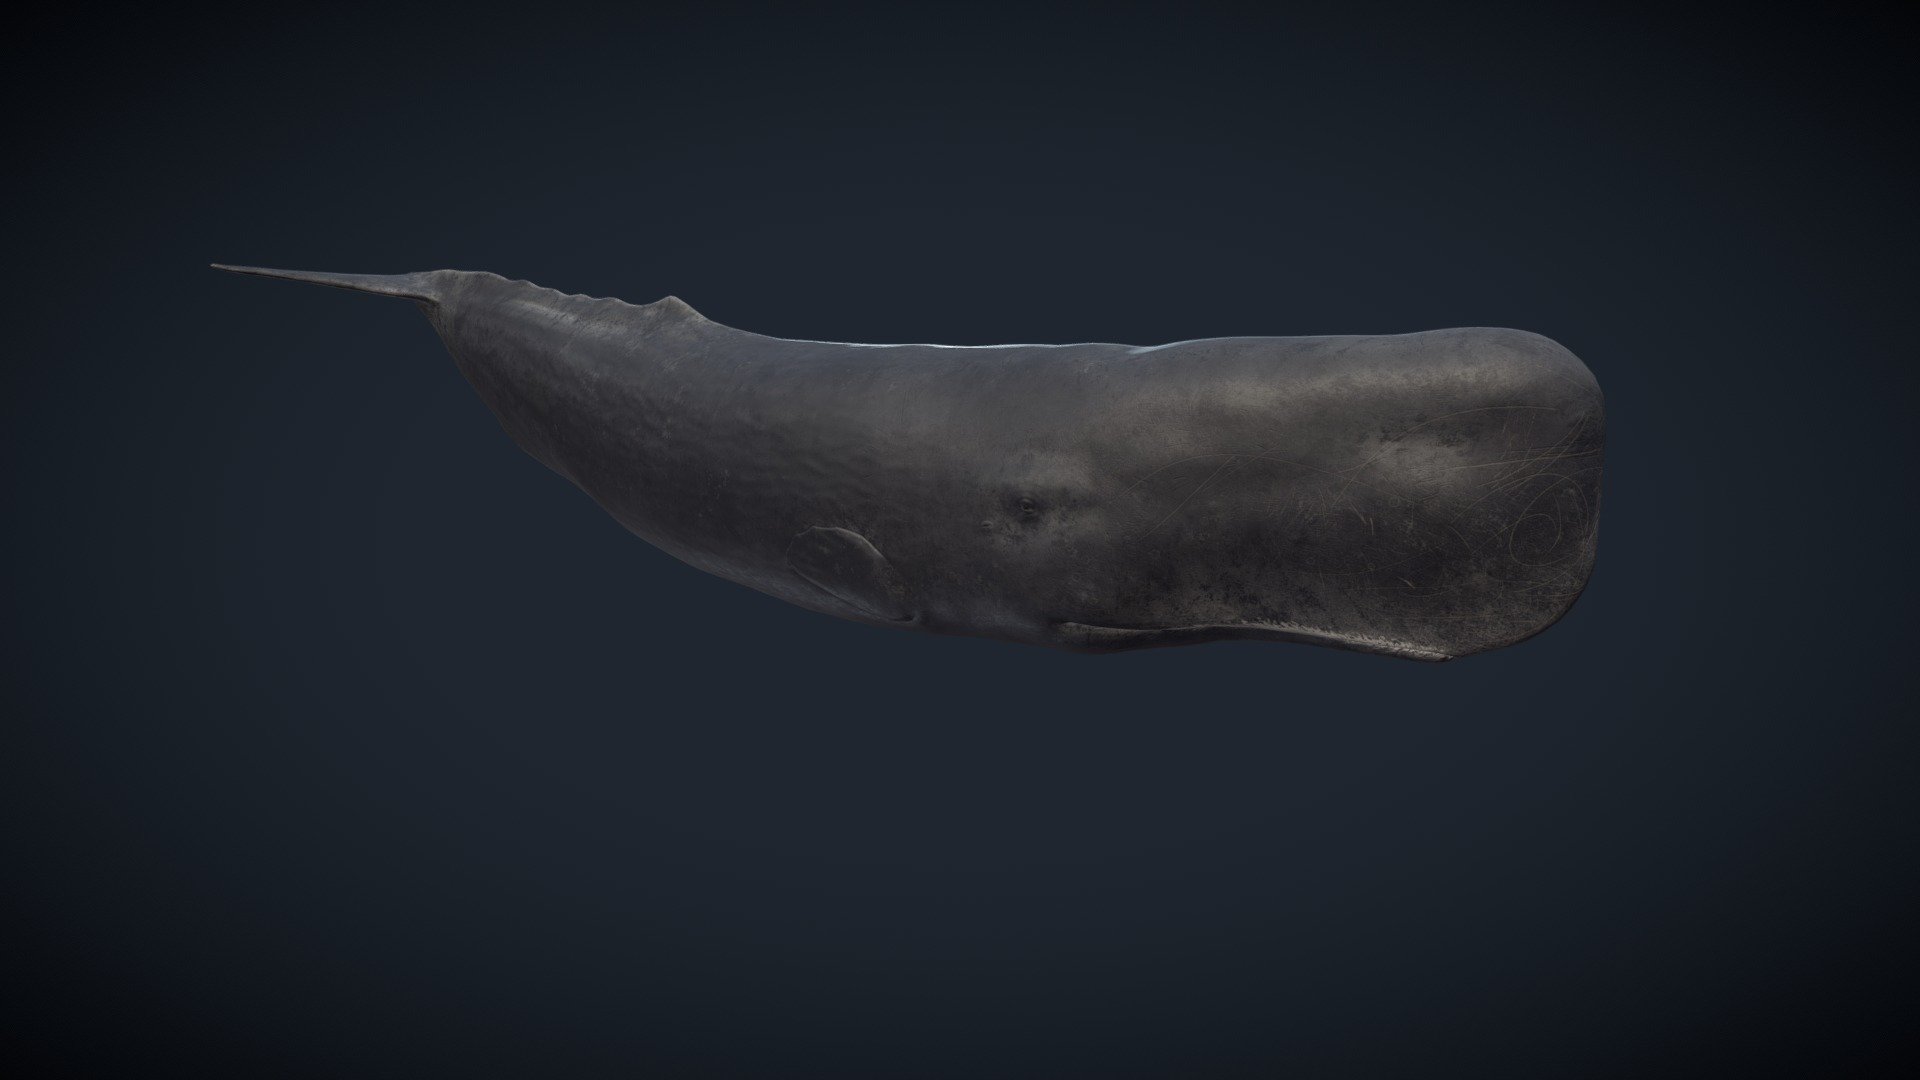 Sculpted in ZBrush
Retopo and UV mapping in Blender
Painted in Substance Painter
Rigged and animated in Blender

Couldn't find any decent 3D cachalot so I made one. Even with some small details I'm not happy with, I can say it's probably the best one out there.

https://youtu.be/vbe9RzhpZTY

Some shots on my ArtStation
You can also find me on Instagram
and Twitter

IMPORTANT If you buy this product, I include a .zip with:


Original .blend file. This one has a basic, yet better rig than the one used for this preview which does NOT contain animations. I recommend you to export to your filetype of preference using this .blend
.fbx and .obj files.
.zip with all the textures (Normalmap, AO, roughness, height and 3 albedo maps: one normal color, one much darker, and a white, &ldquo;Moby Dick